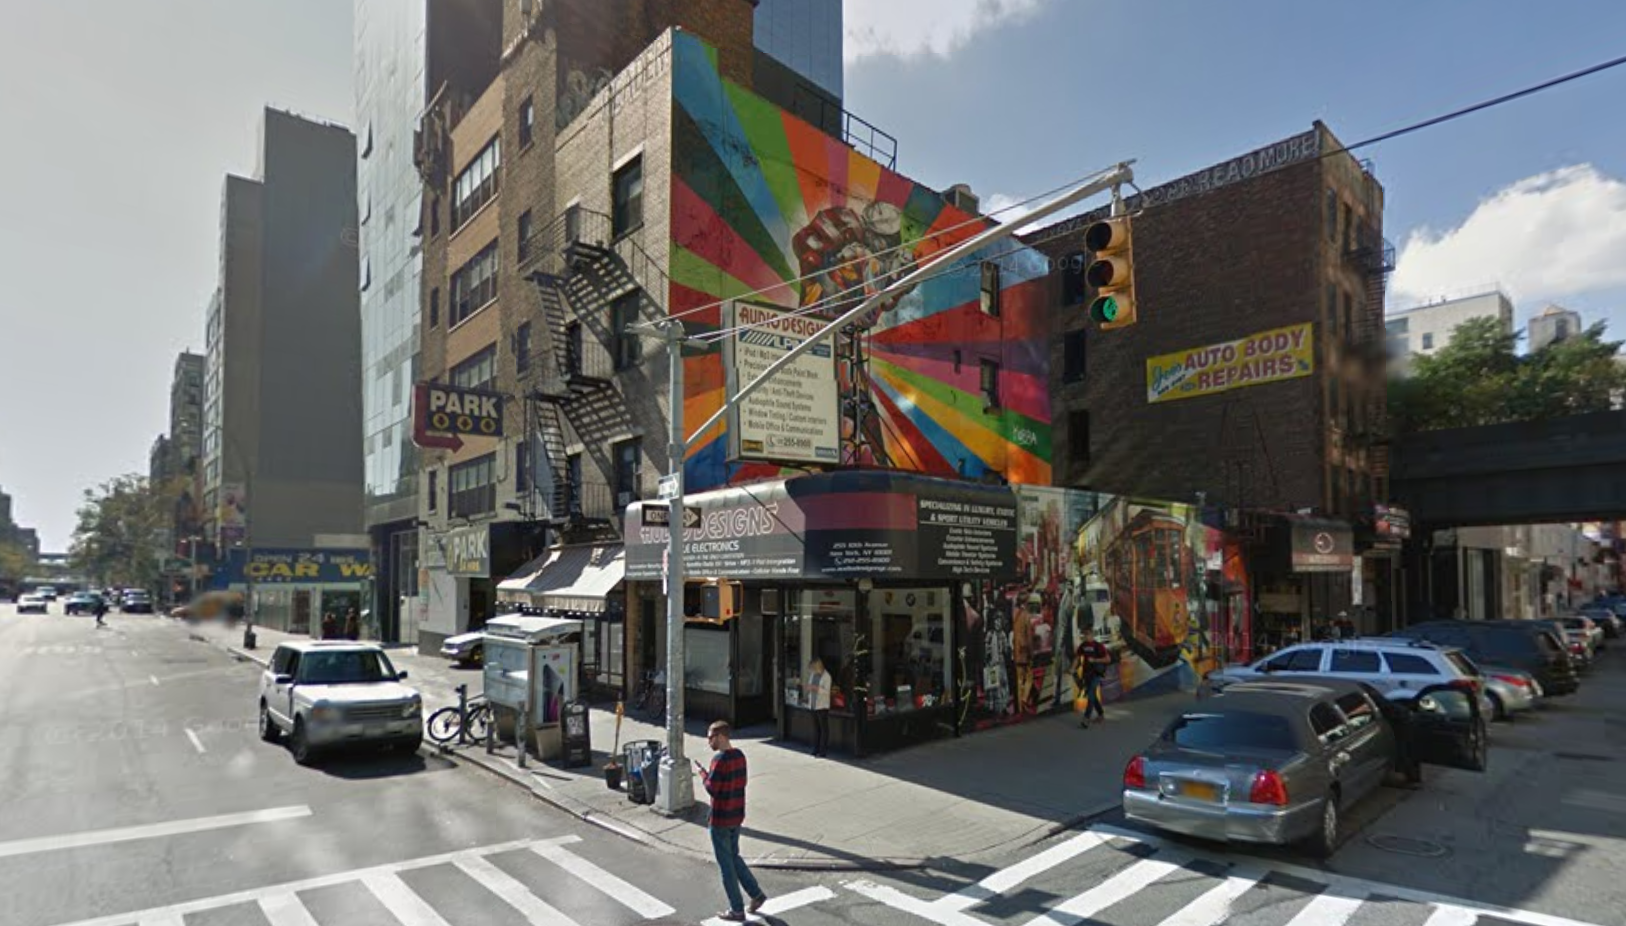 500 West 25th Street and 253 10th Avenue in 2014, image via Google Maps